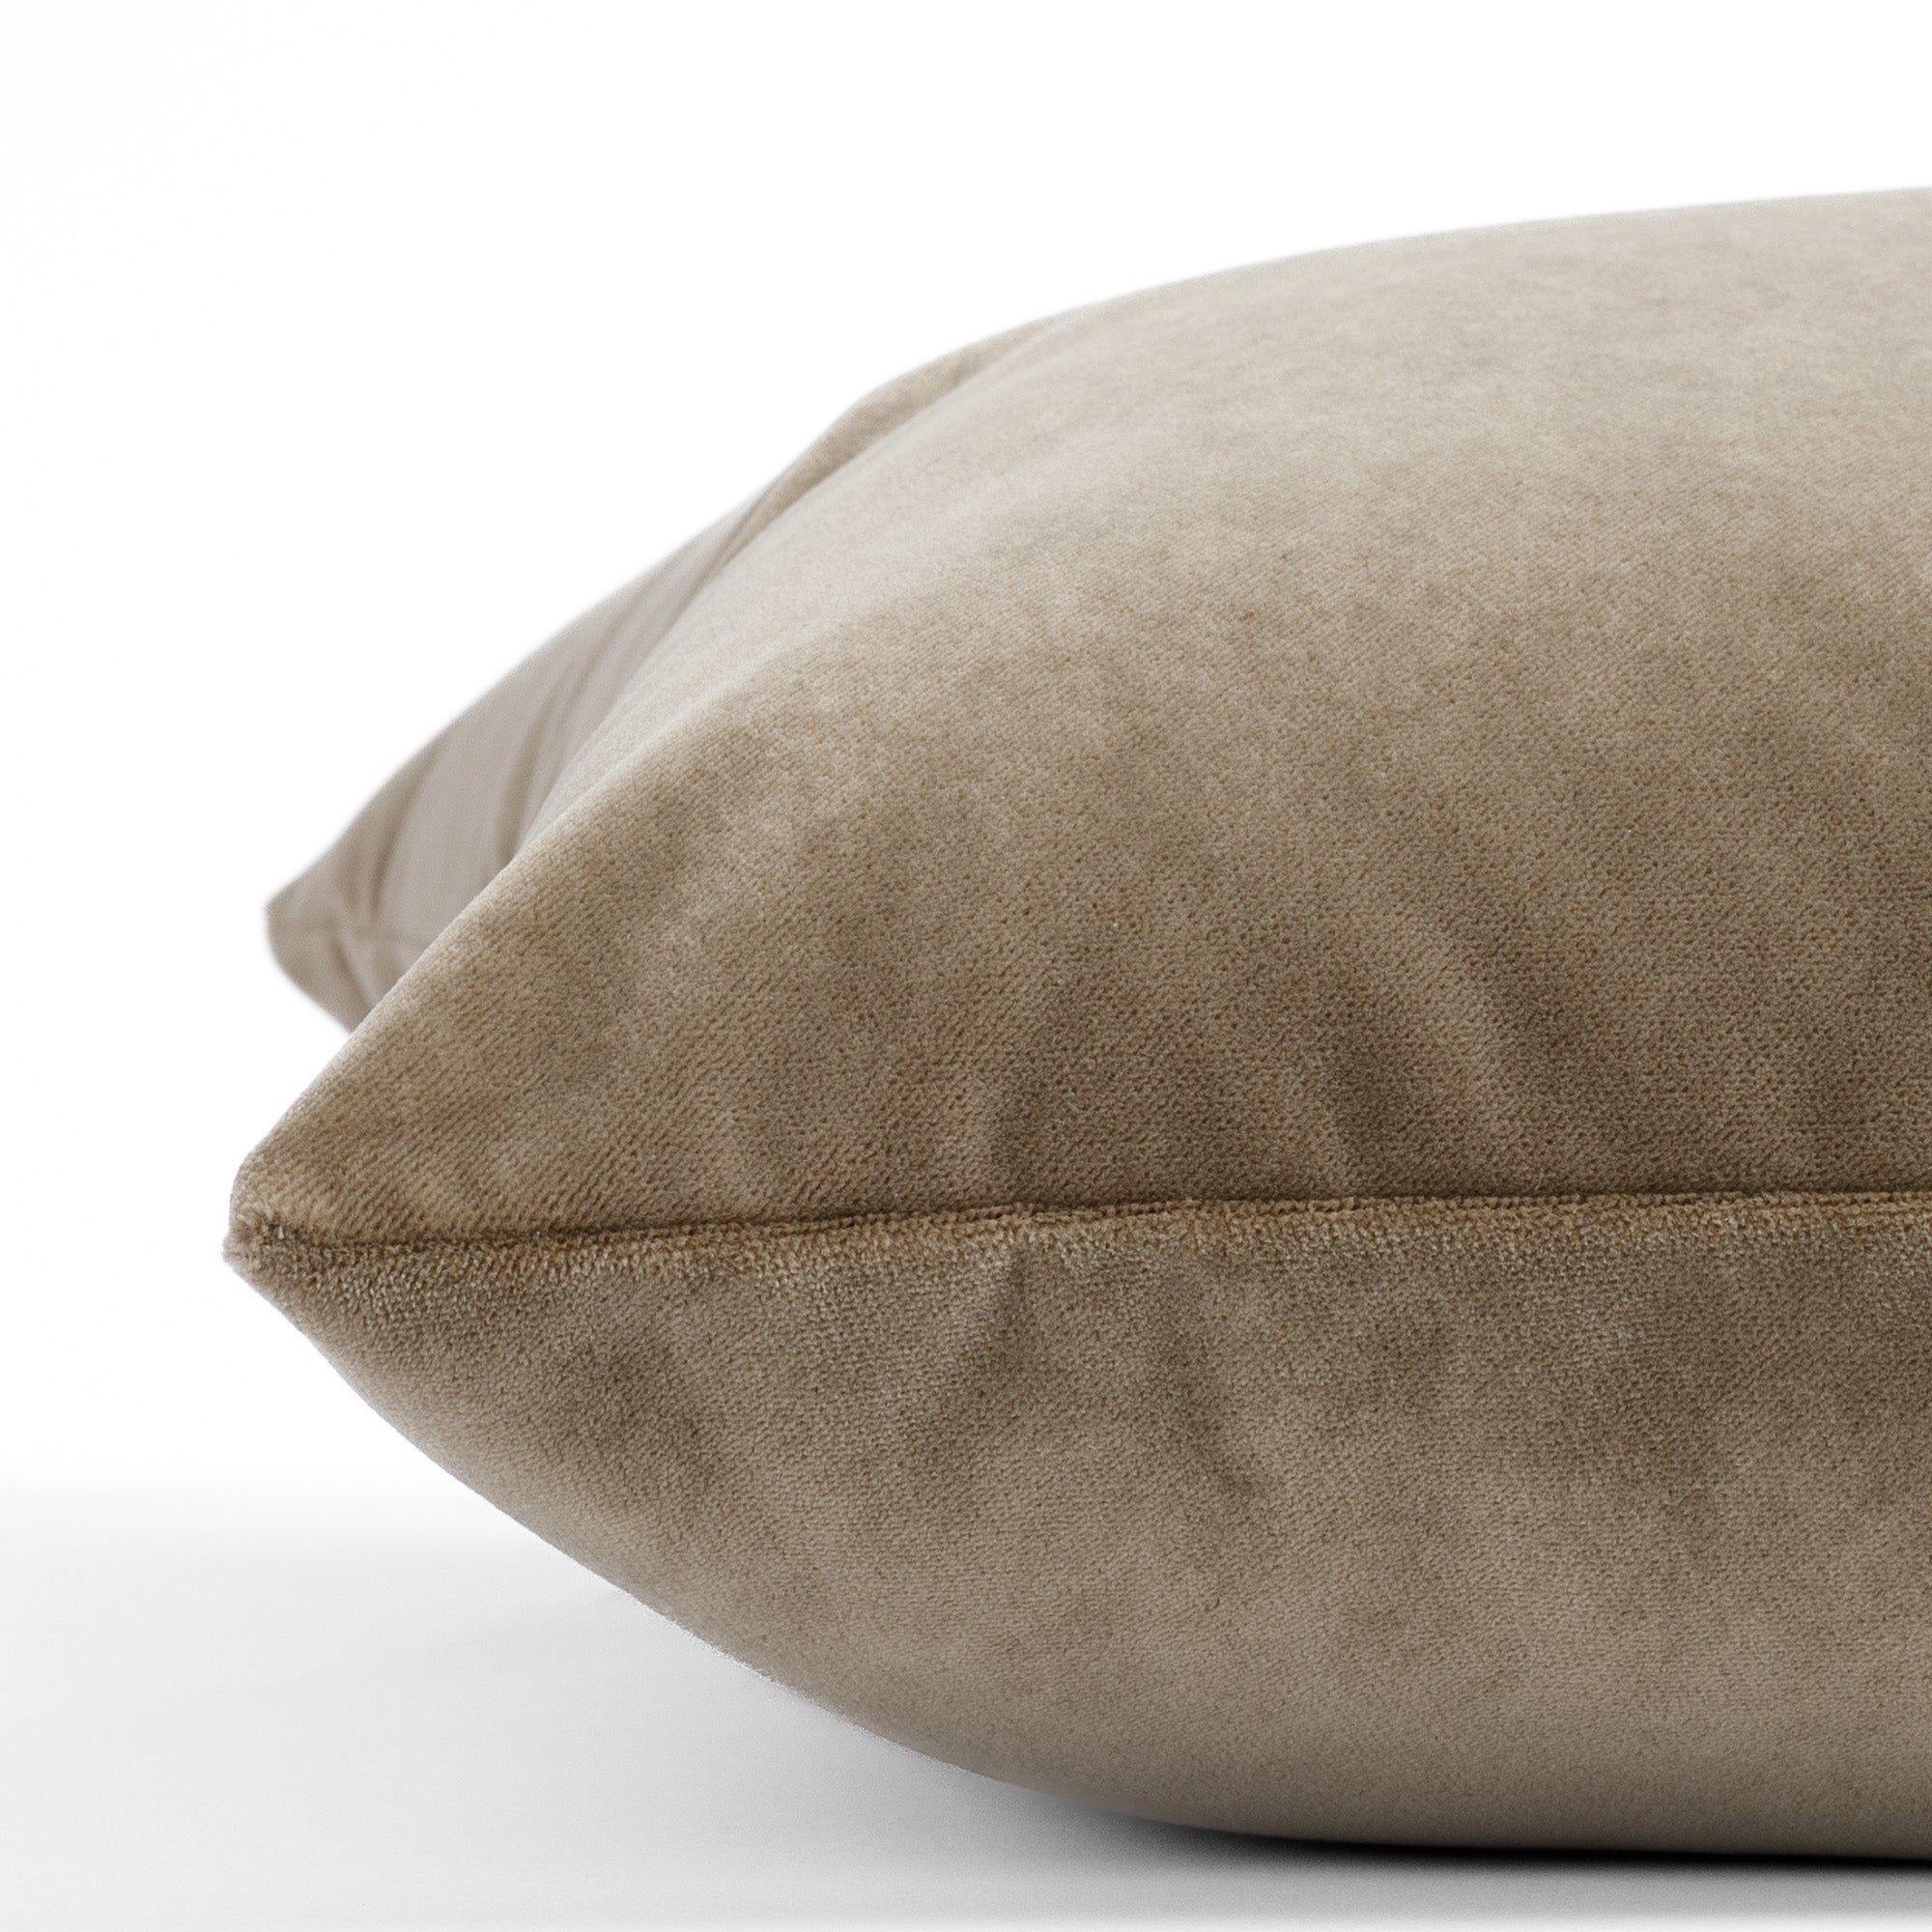 an earthy brown pillow : close up side view